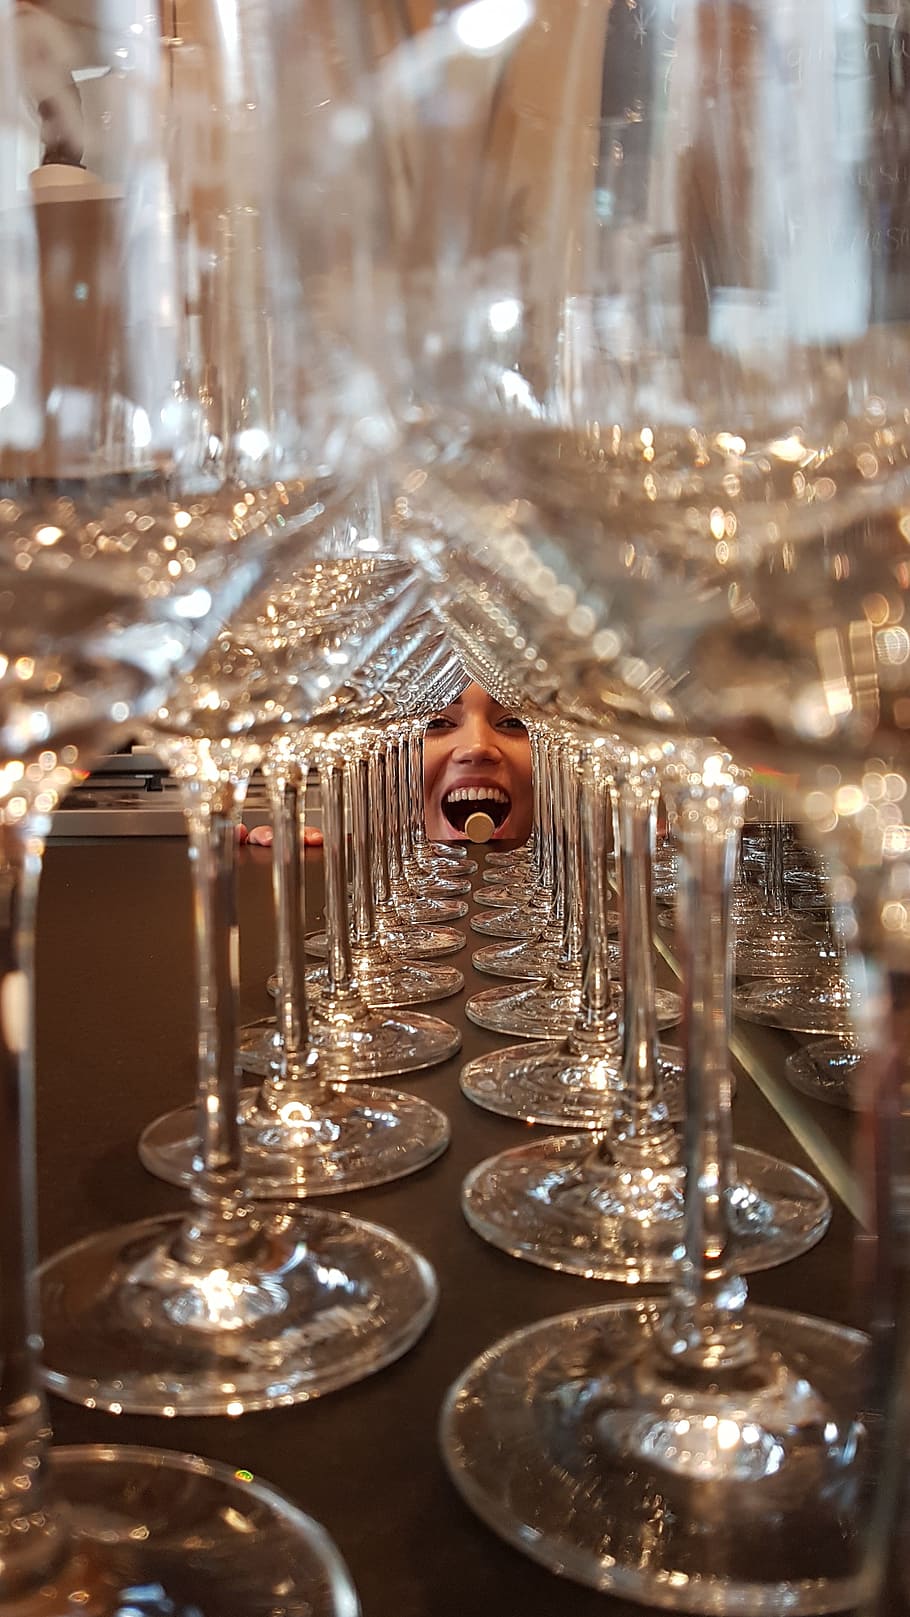 glasses, face, drinking games, fun, drink, gastronomy, mouth, laugh, tunnel, wine corks